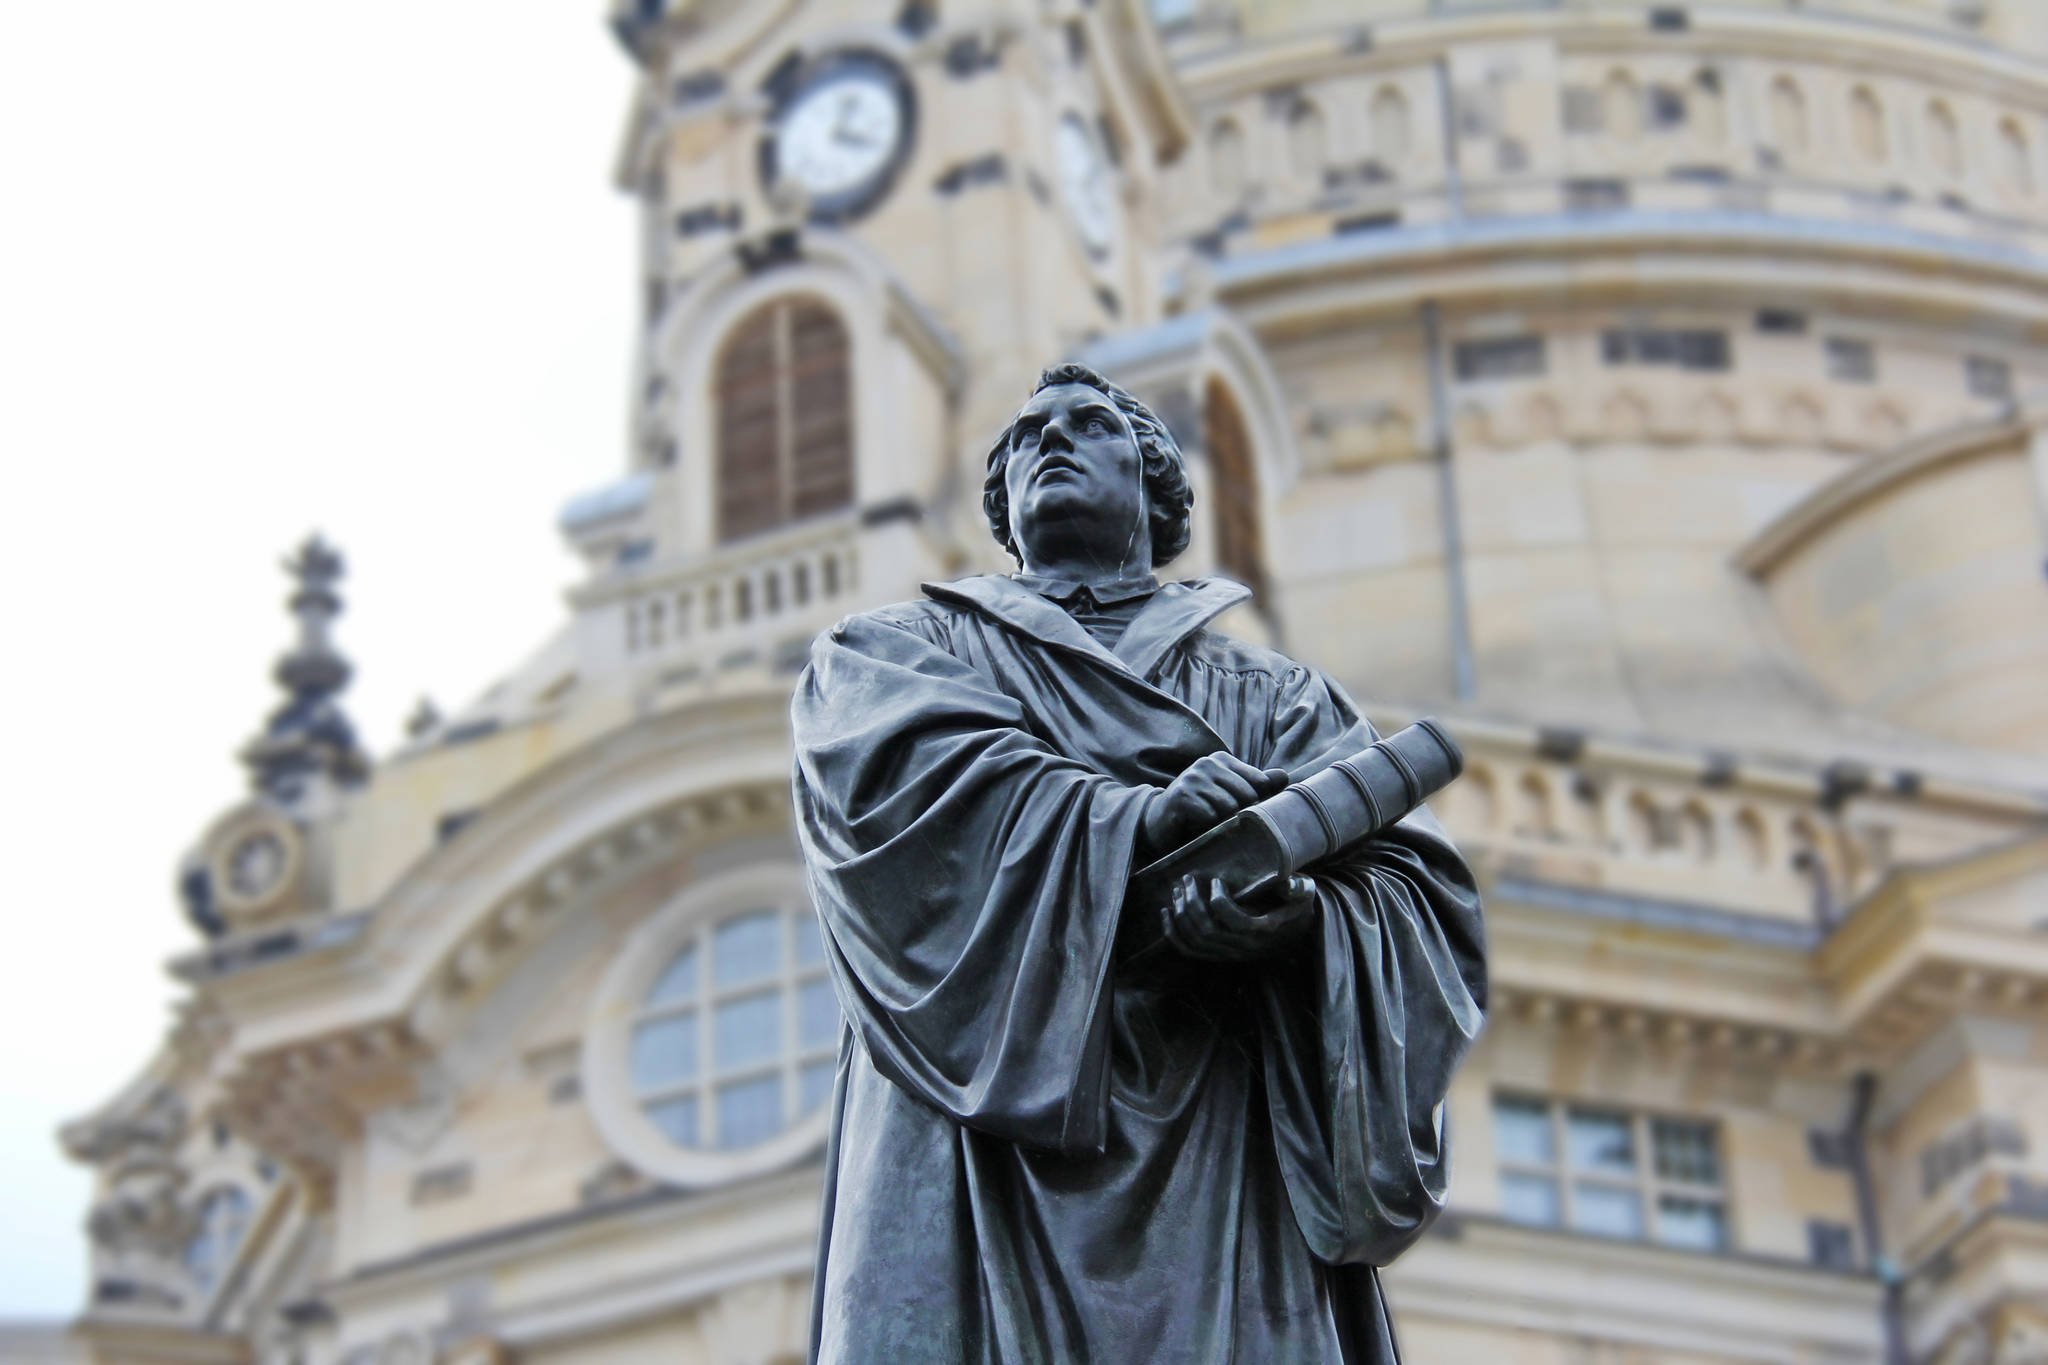 A statue of Martin Luther. (Photo courtesy of Pixastock)